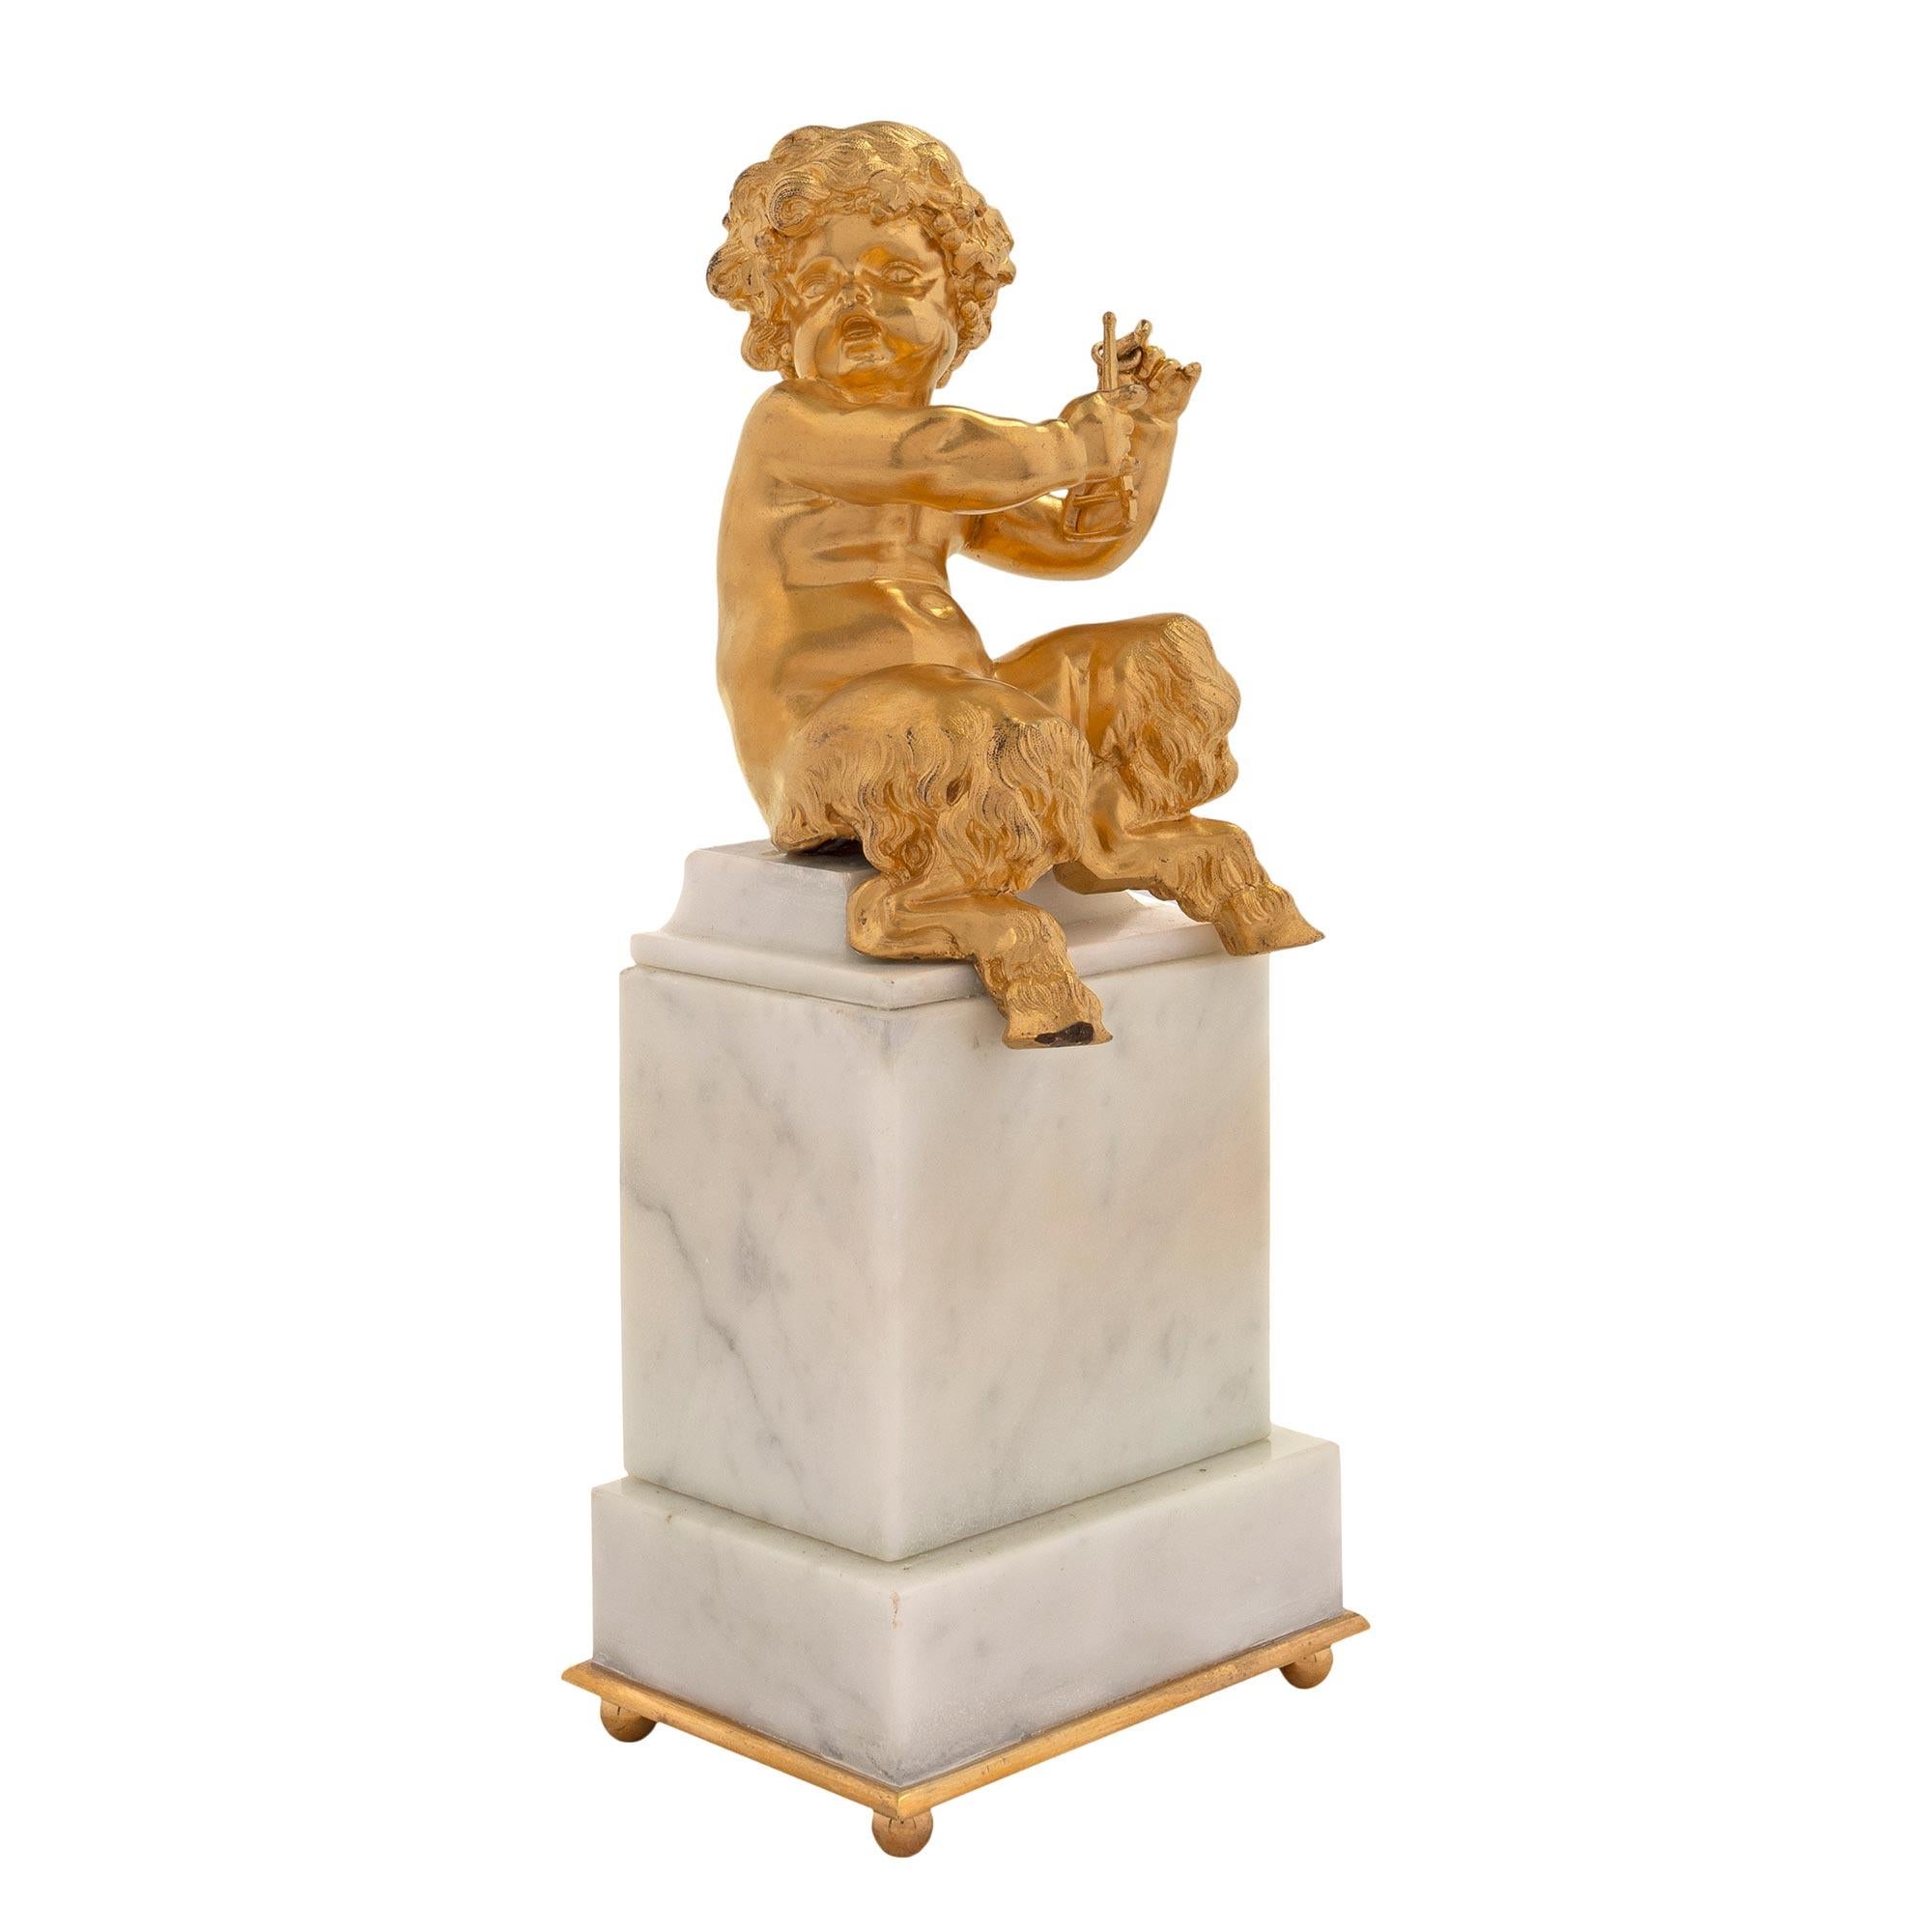 Pair of French Mid-19th Century Louis XVI Style Statues of Young Cherubs For Sale 2